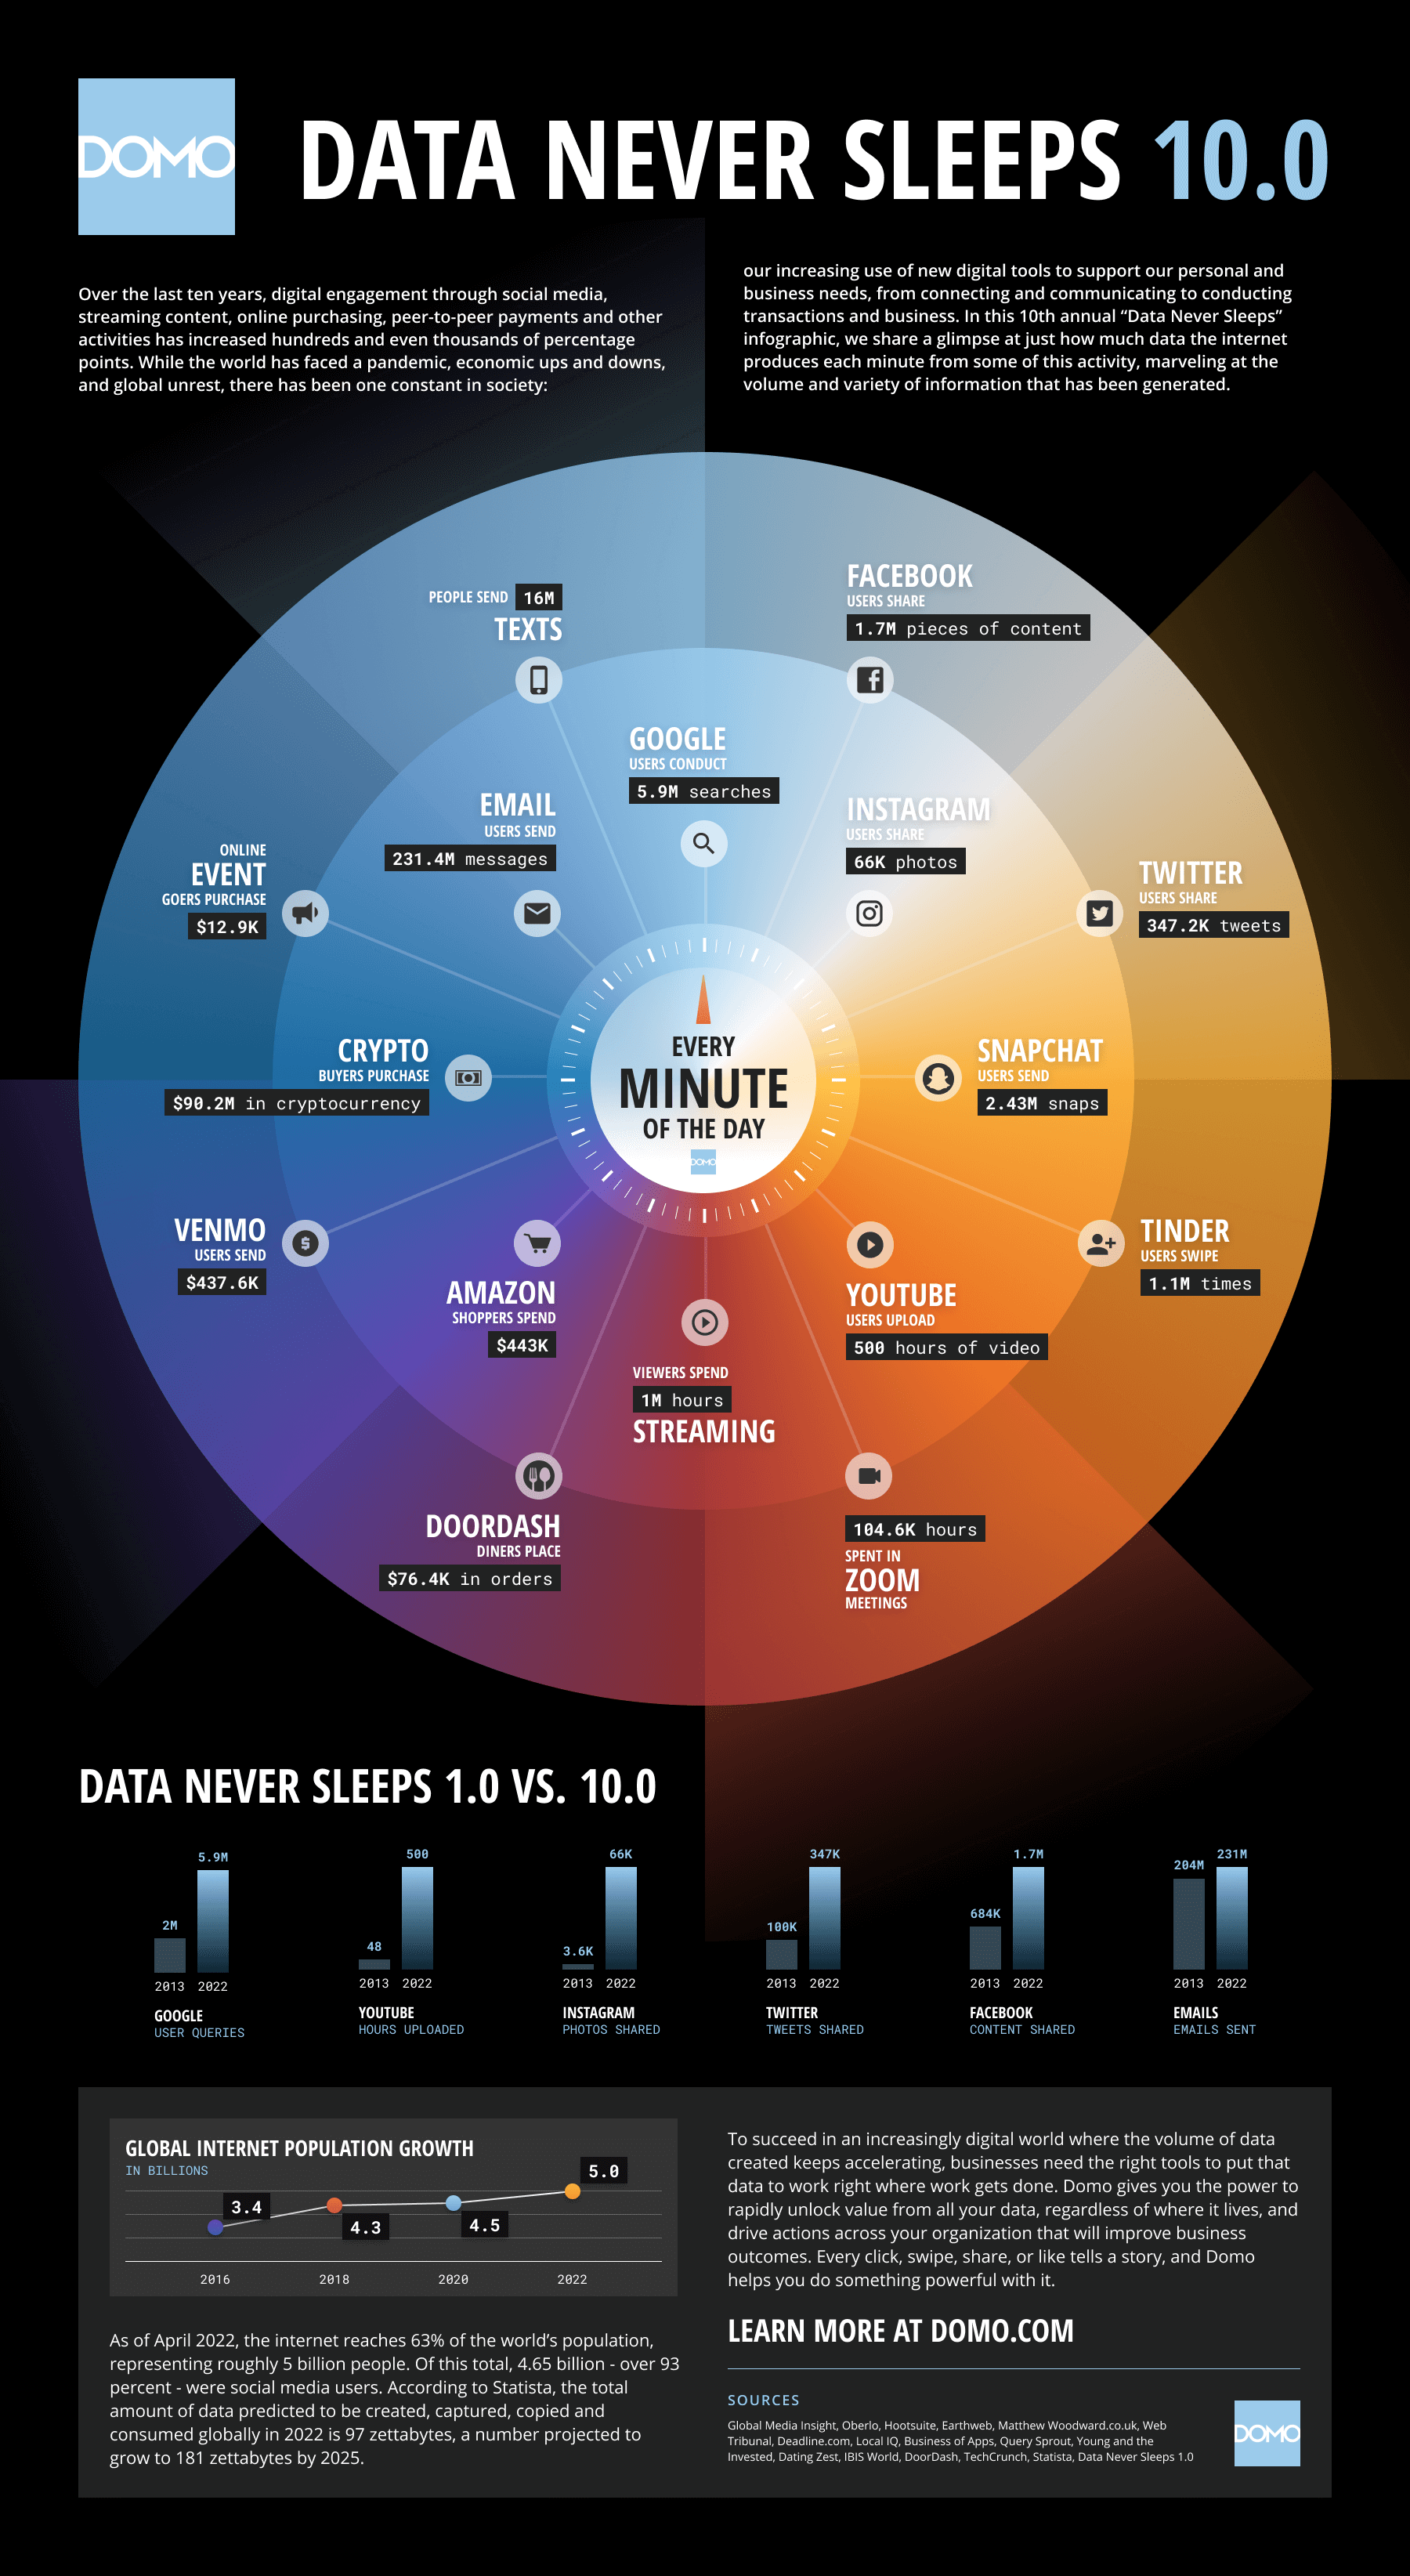 Data Never Sleeps 10.0 - how much data is generated every minute?